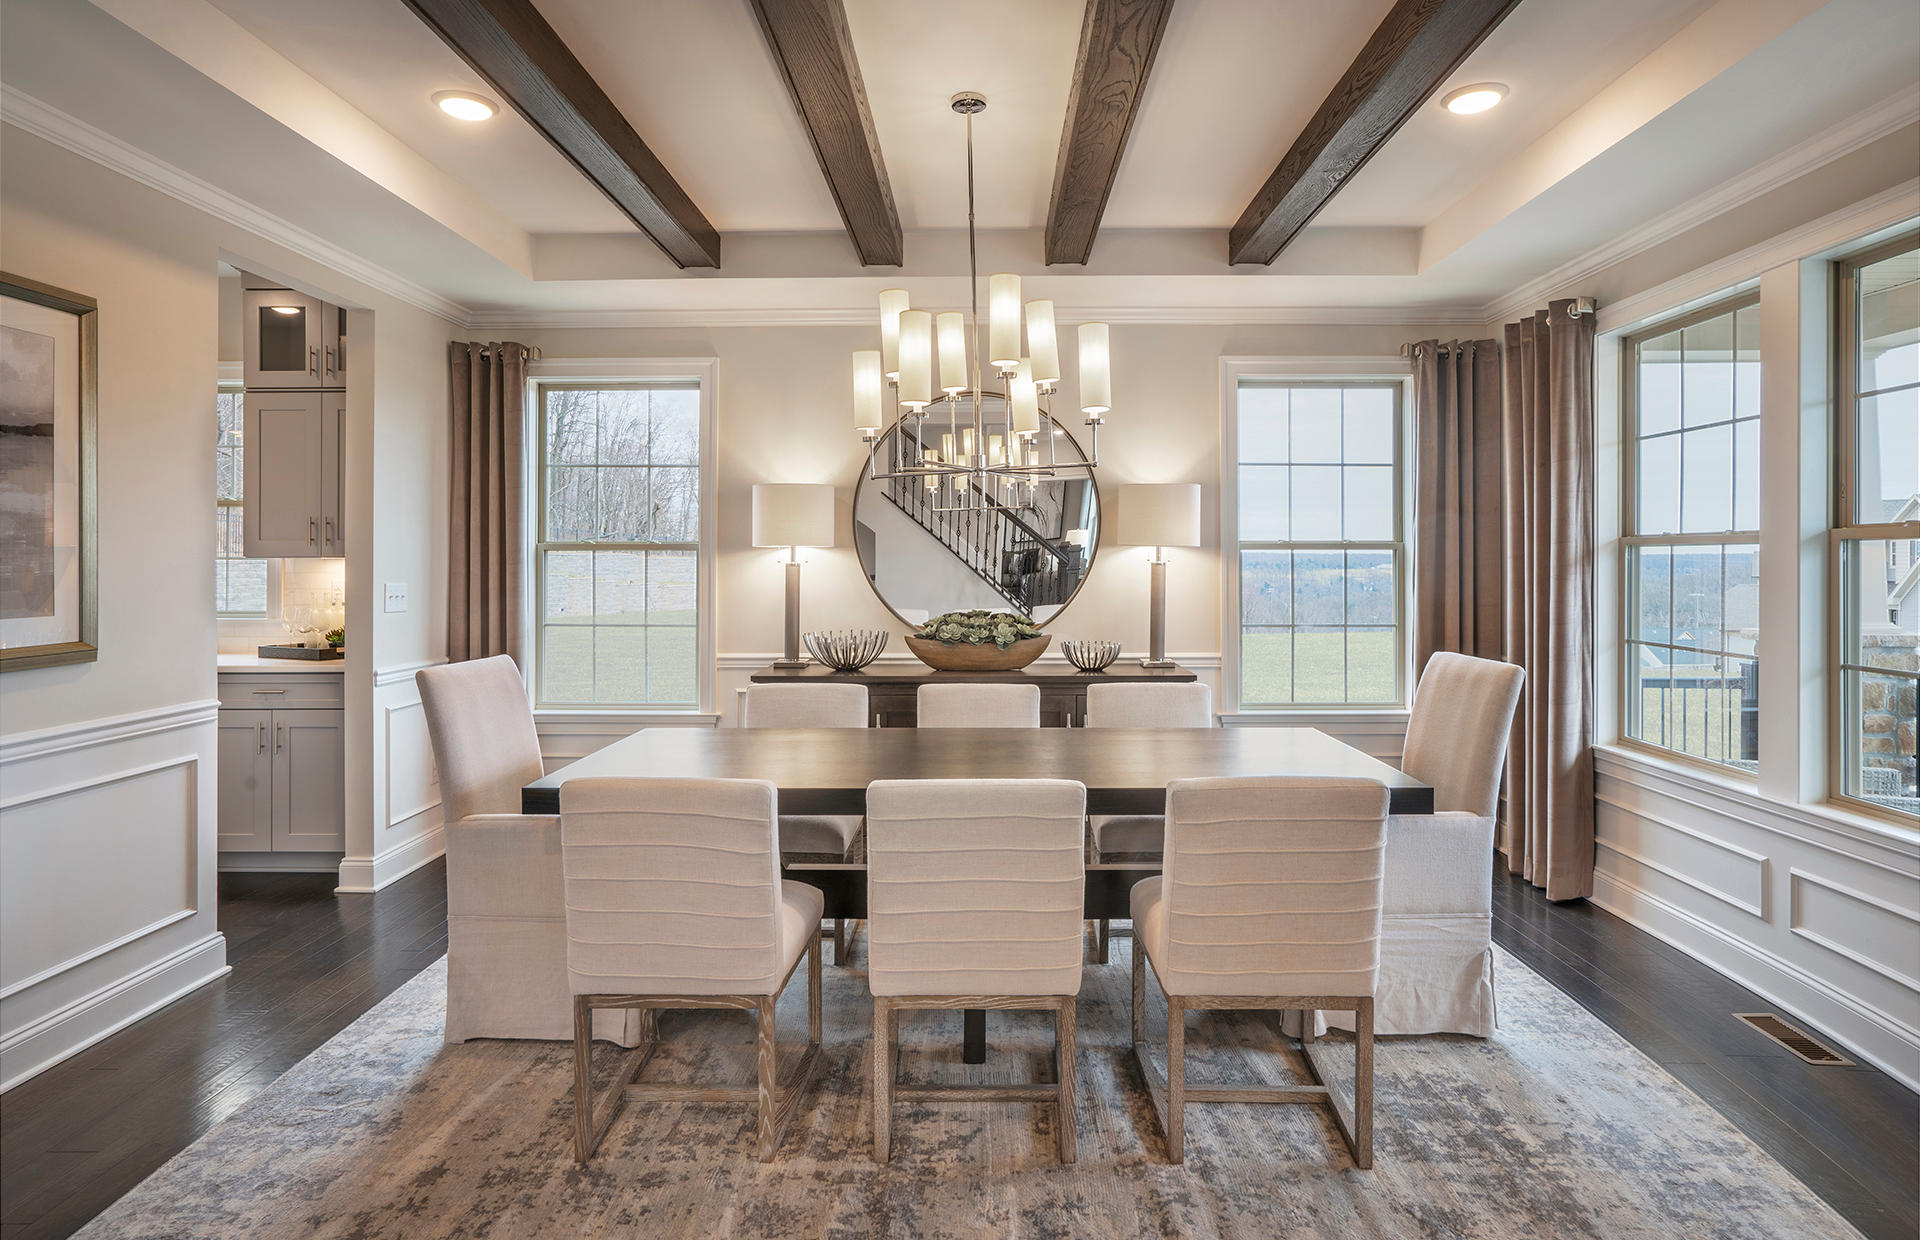 Reserve at North Caldwell by Pulte Homes Photo